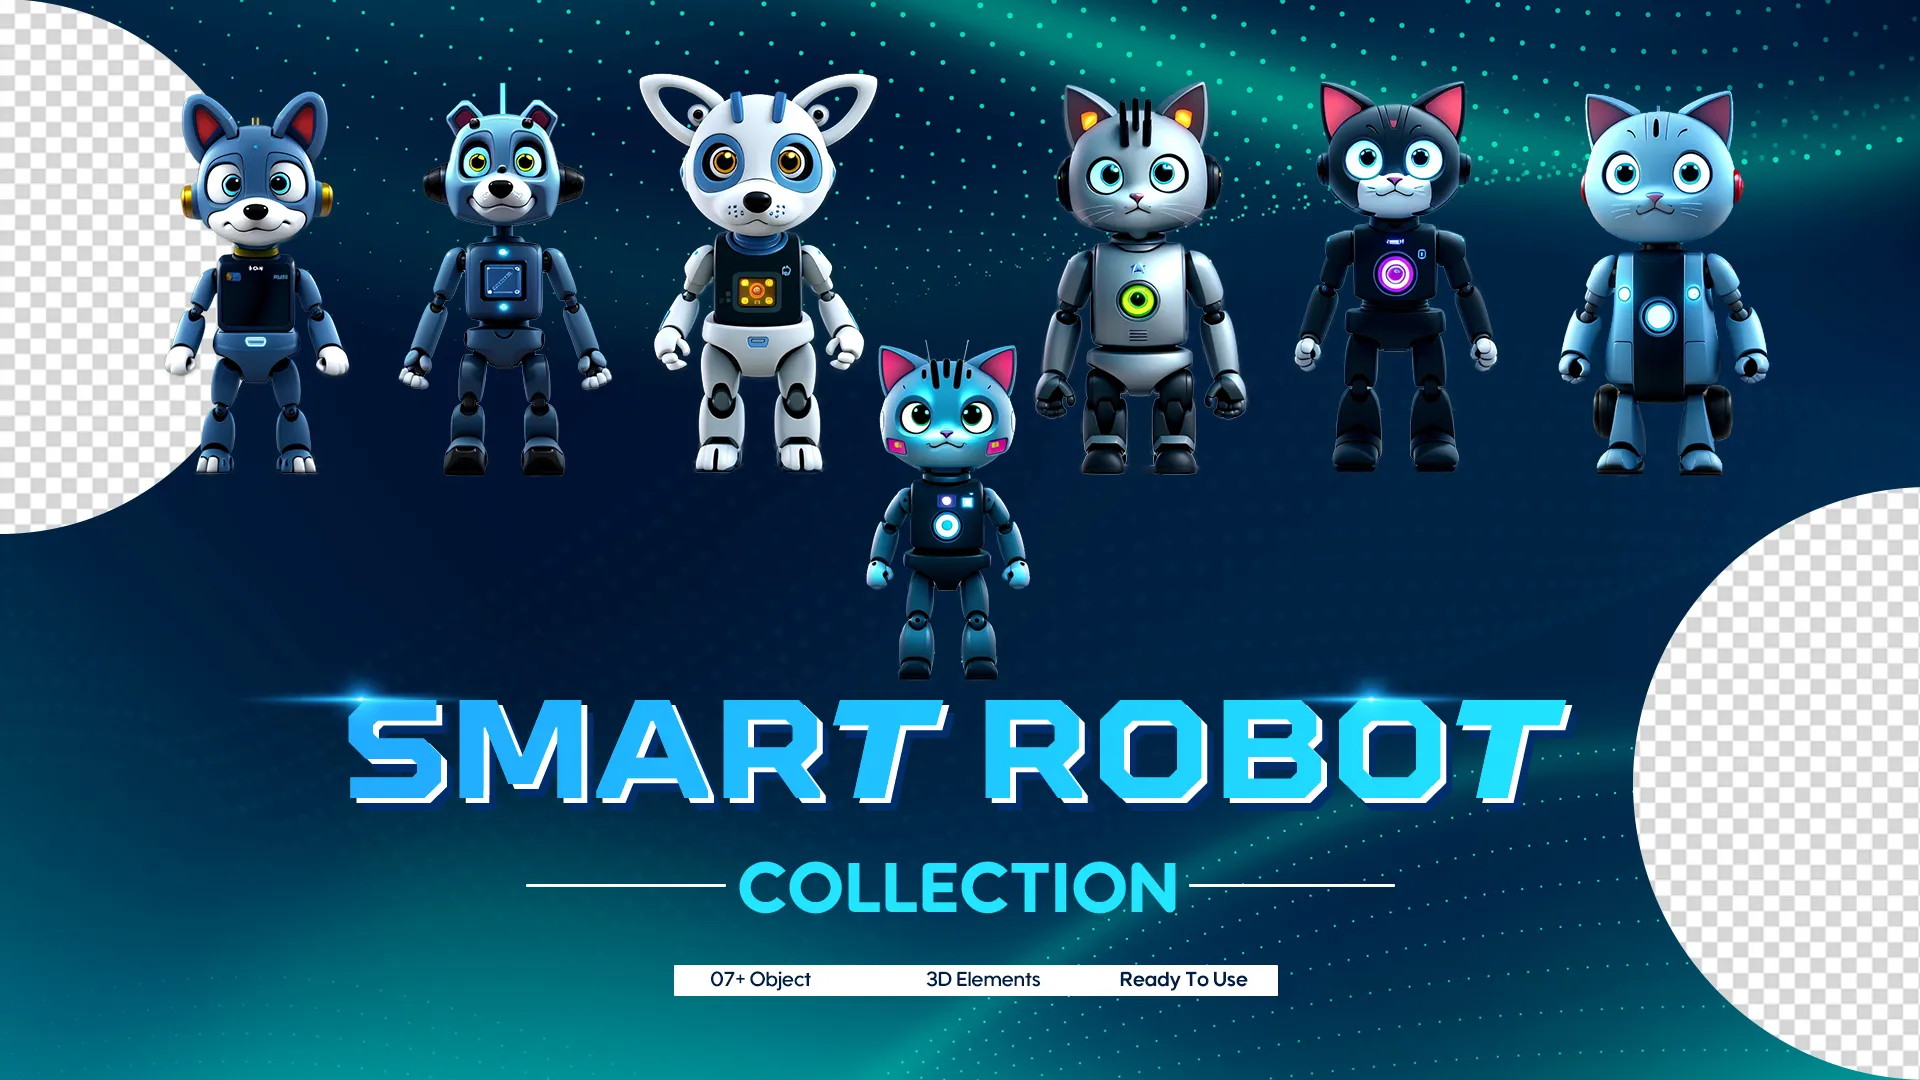 Smart Robots Character PNG Pack image